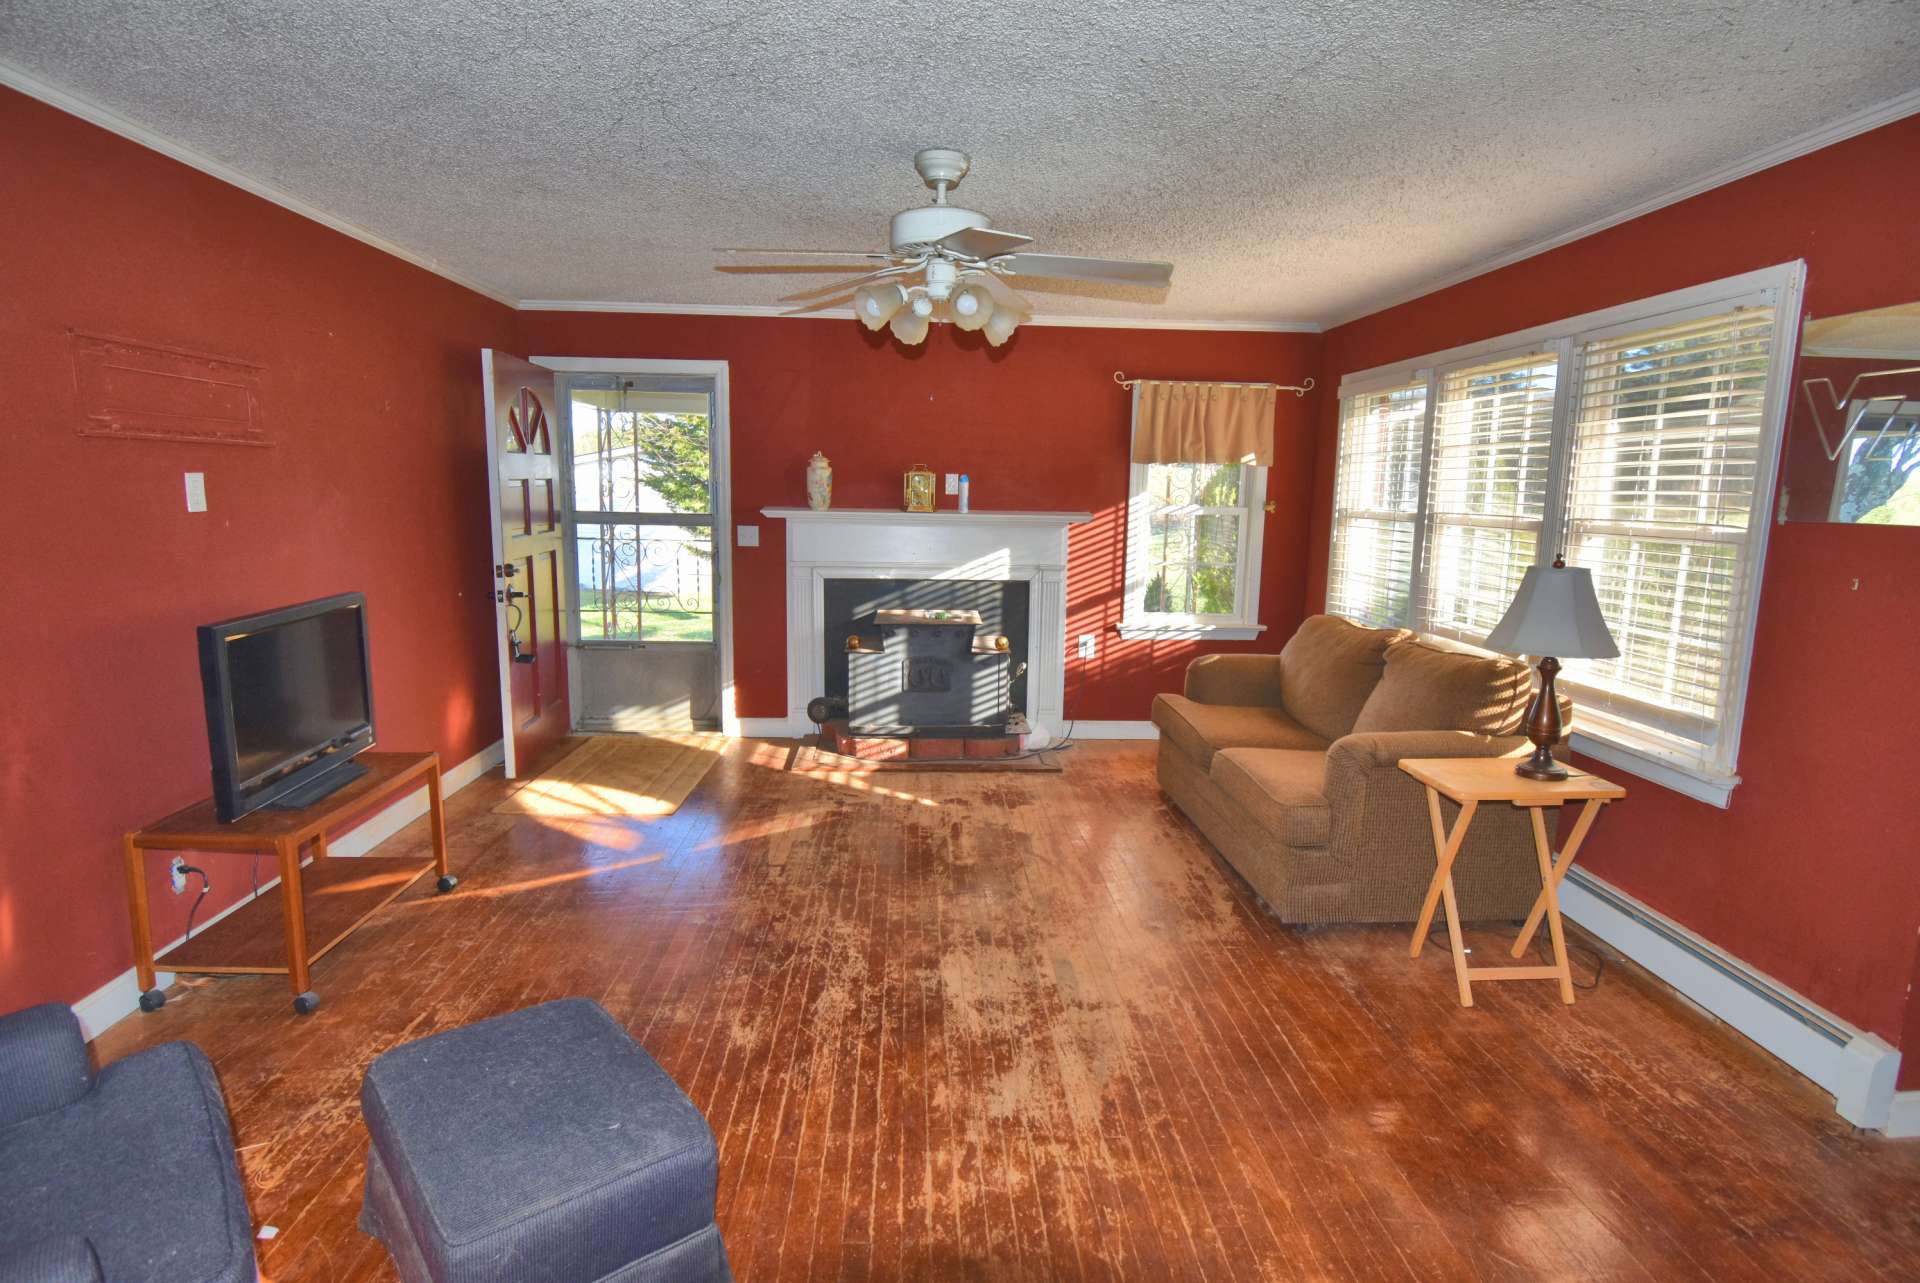 The main home features wood floors and a wood burning fireplace with stove insert in the living room.